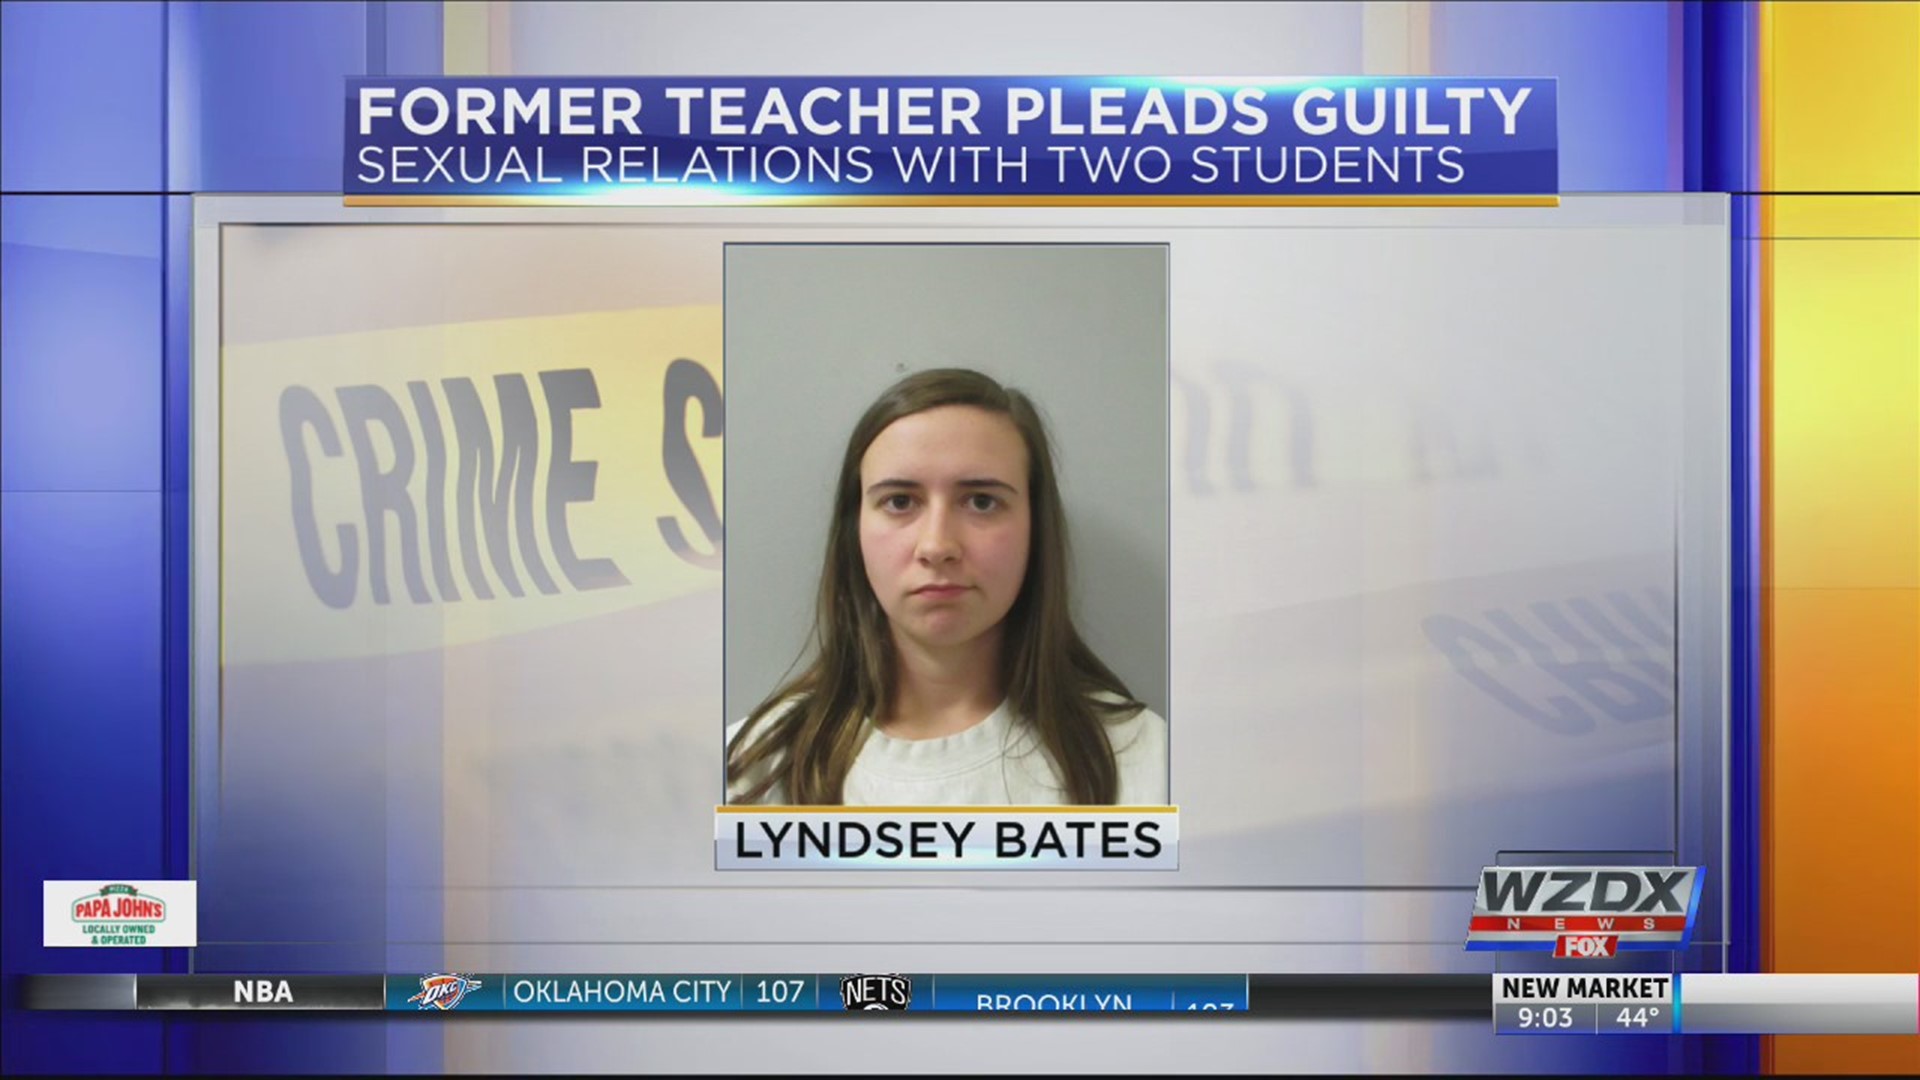 A former Madison County teacher who was arrested last spring pleads guilty to criminal charges of having sexual relations with two students.